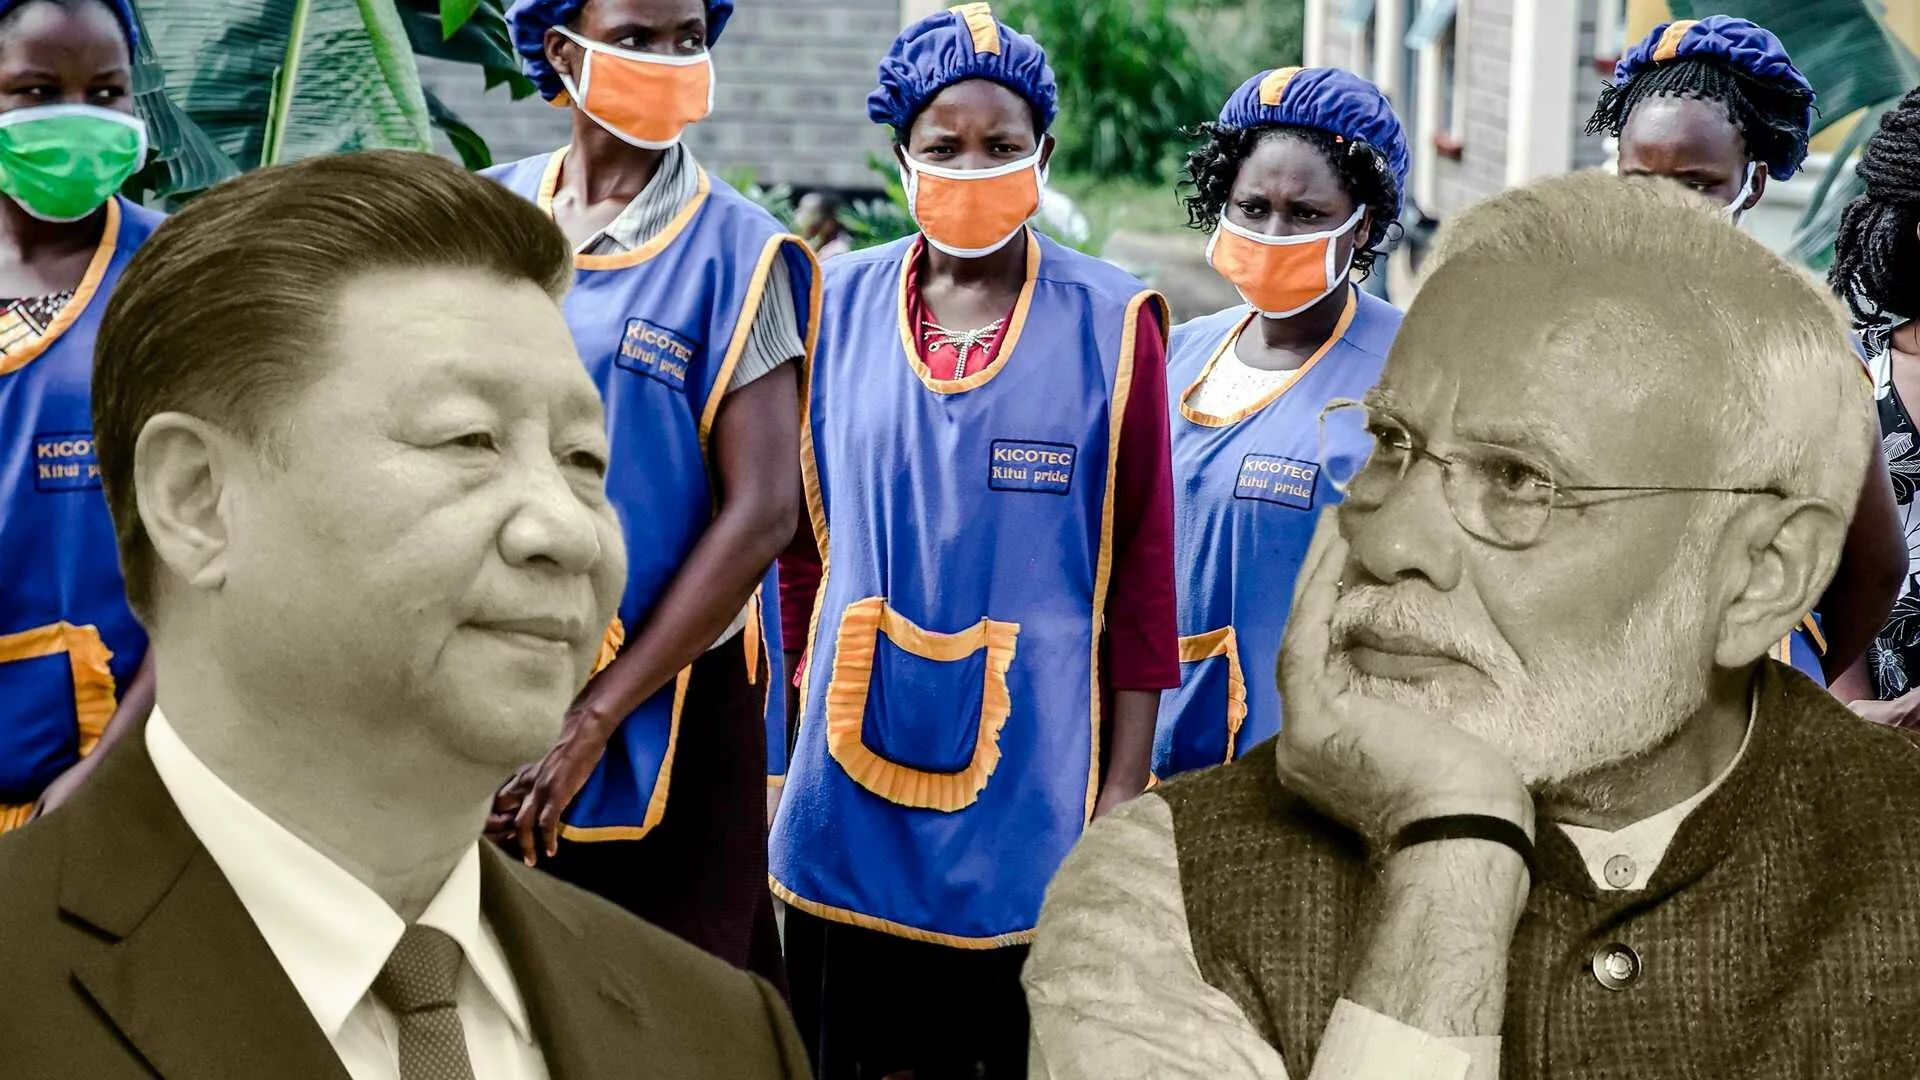 Into Africa: India vies with China for post-pandemic clout